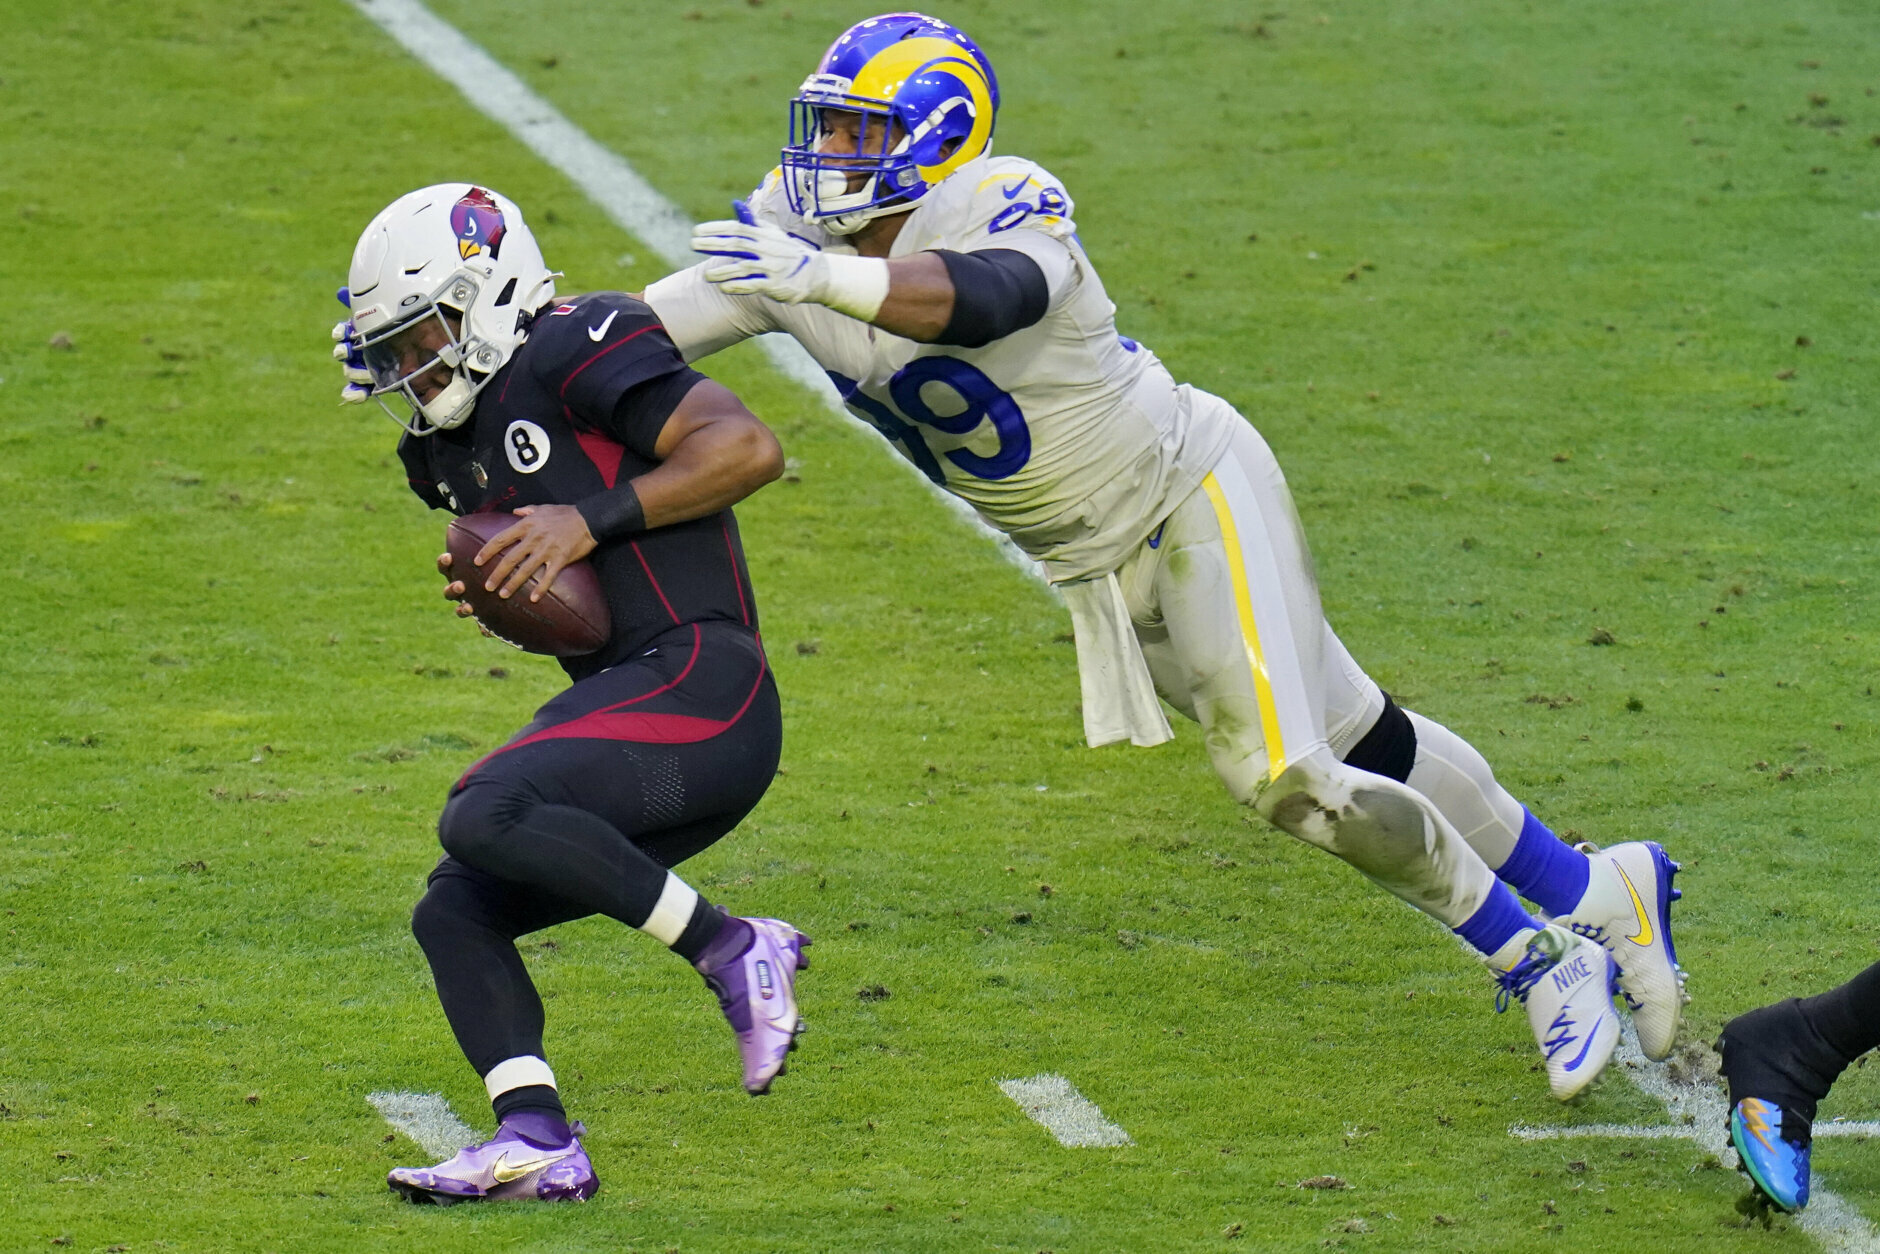 <p><em><strong>Rams 38</strong></em><br />
<em><strong>Cardinals 28</strong></em></p>
<p>So far, Sean McVay beating Arizona (7-0 in his head coaching career) and Kyler Murray getting shutdown by the Rams (0-3 with six turnovers) is right alongside death and taxes. Since the Cardinals have to face the Rams again in L.A. Week 17, that might spell the end of the Cards&#8217; playoff hopes.</p>
